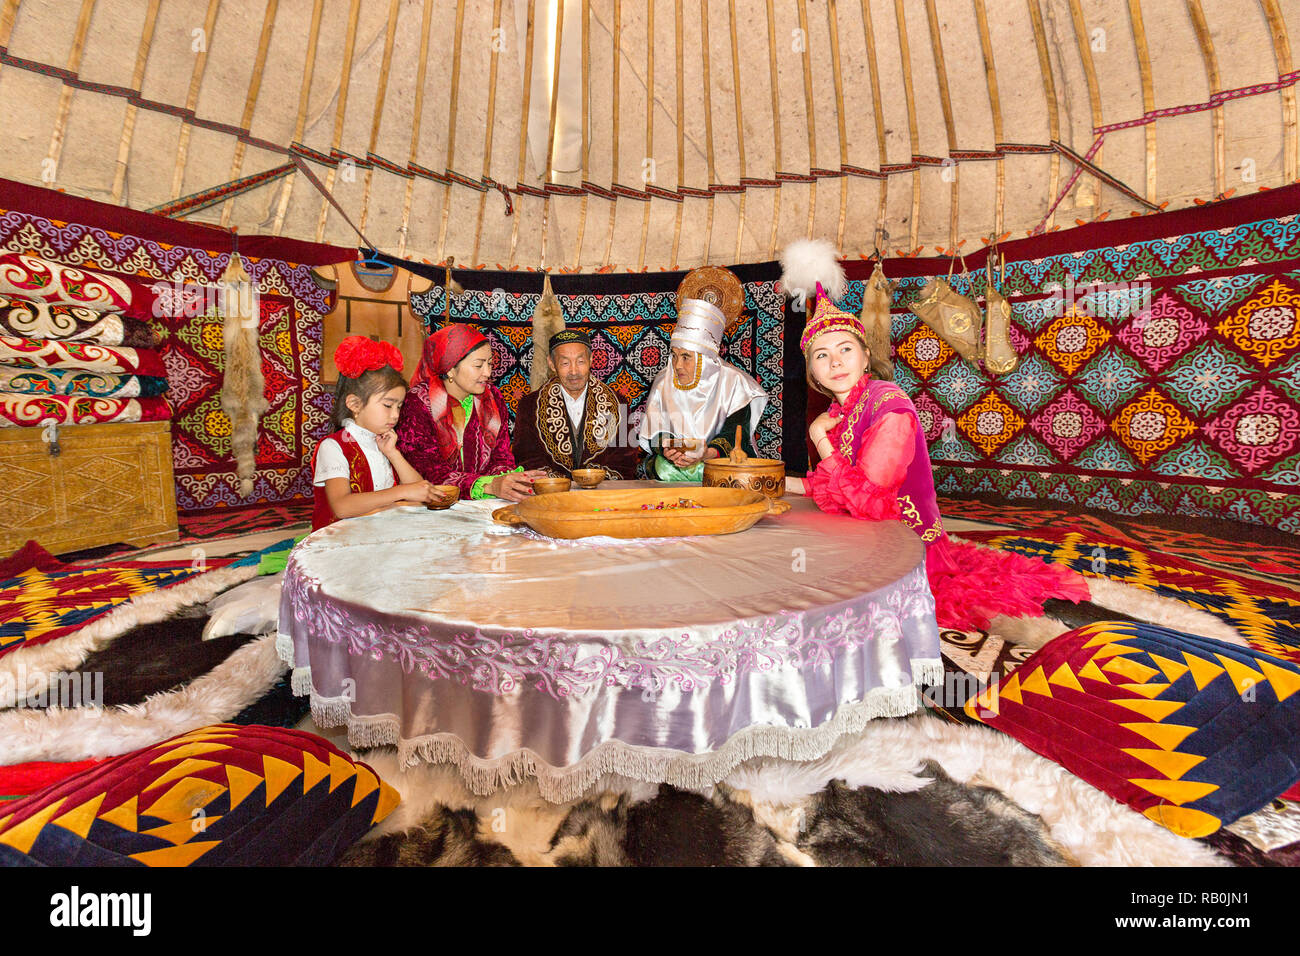 Kazakh people in traditional costumes in a nomadic tent known as yurt, in Kazakhstan. Stock Photo